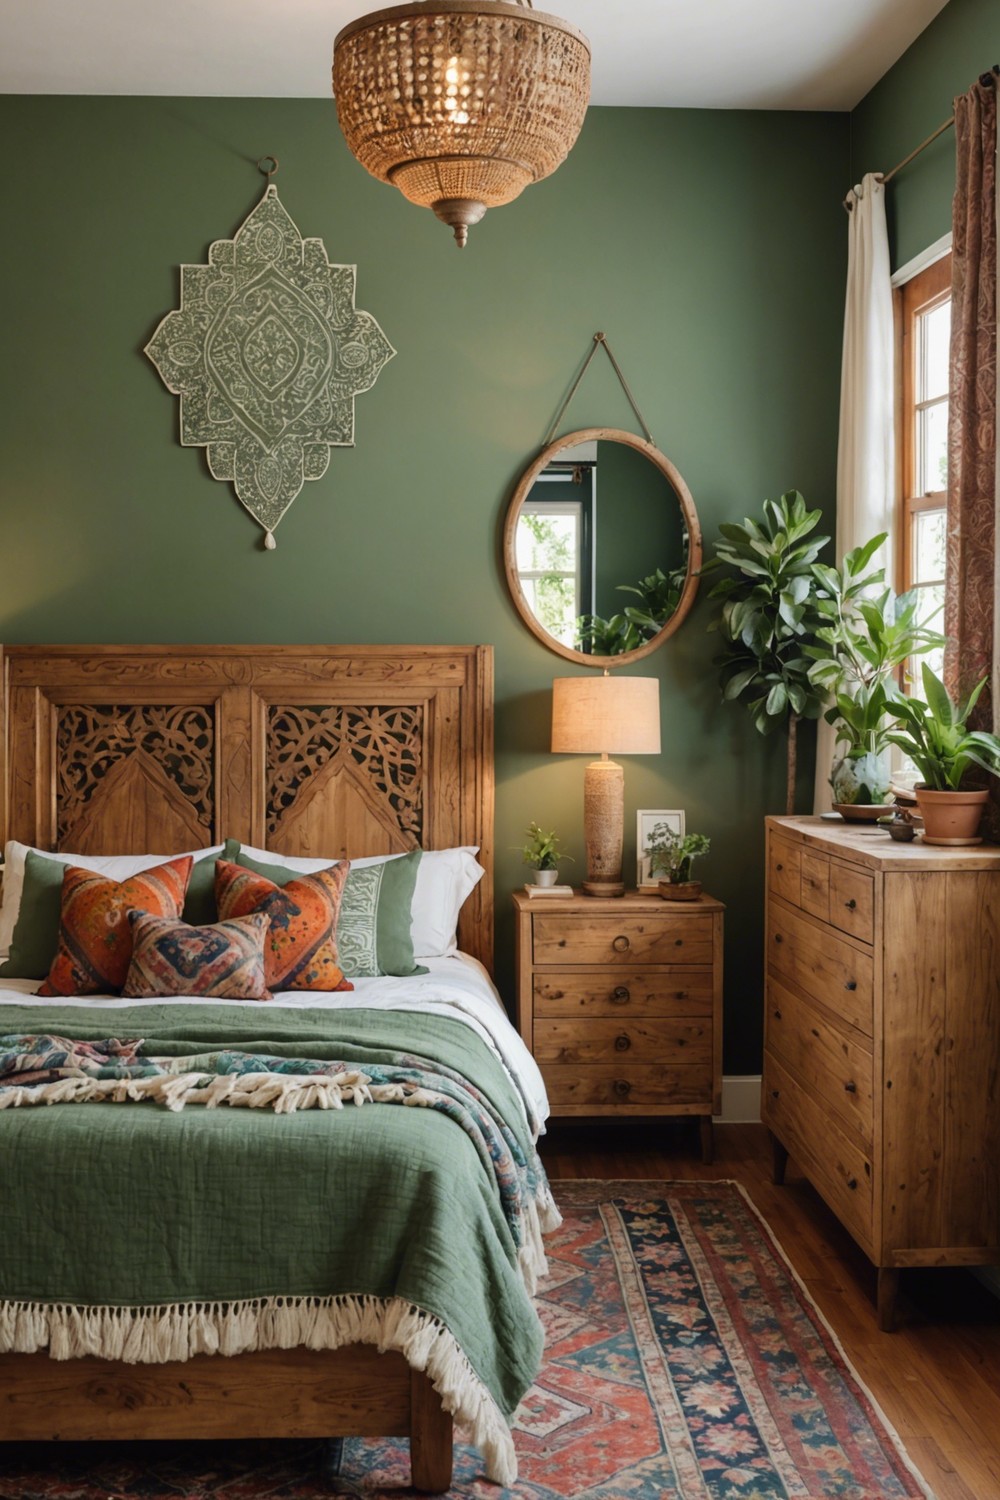 Sage Green Accent Walls with Bohemian Patterns